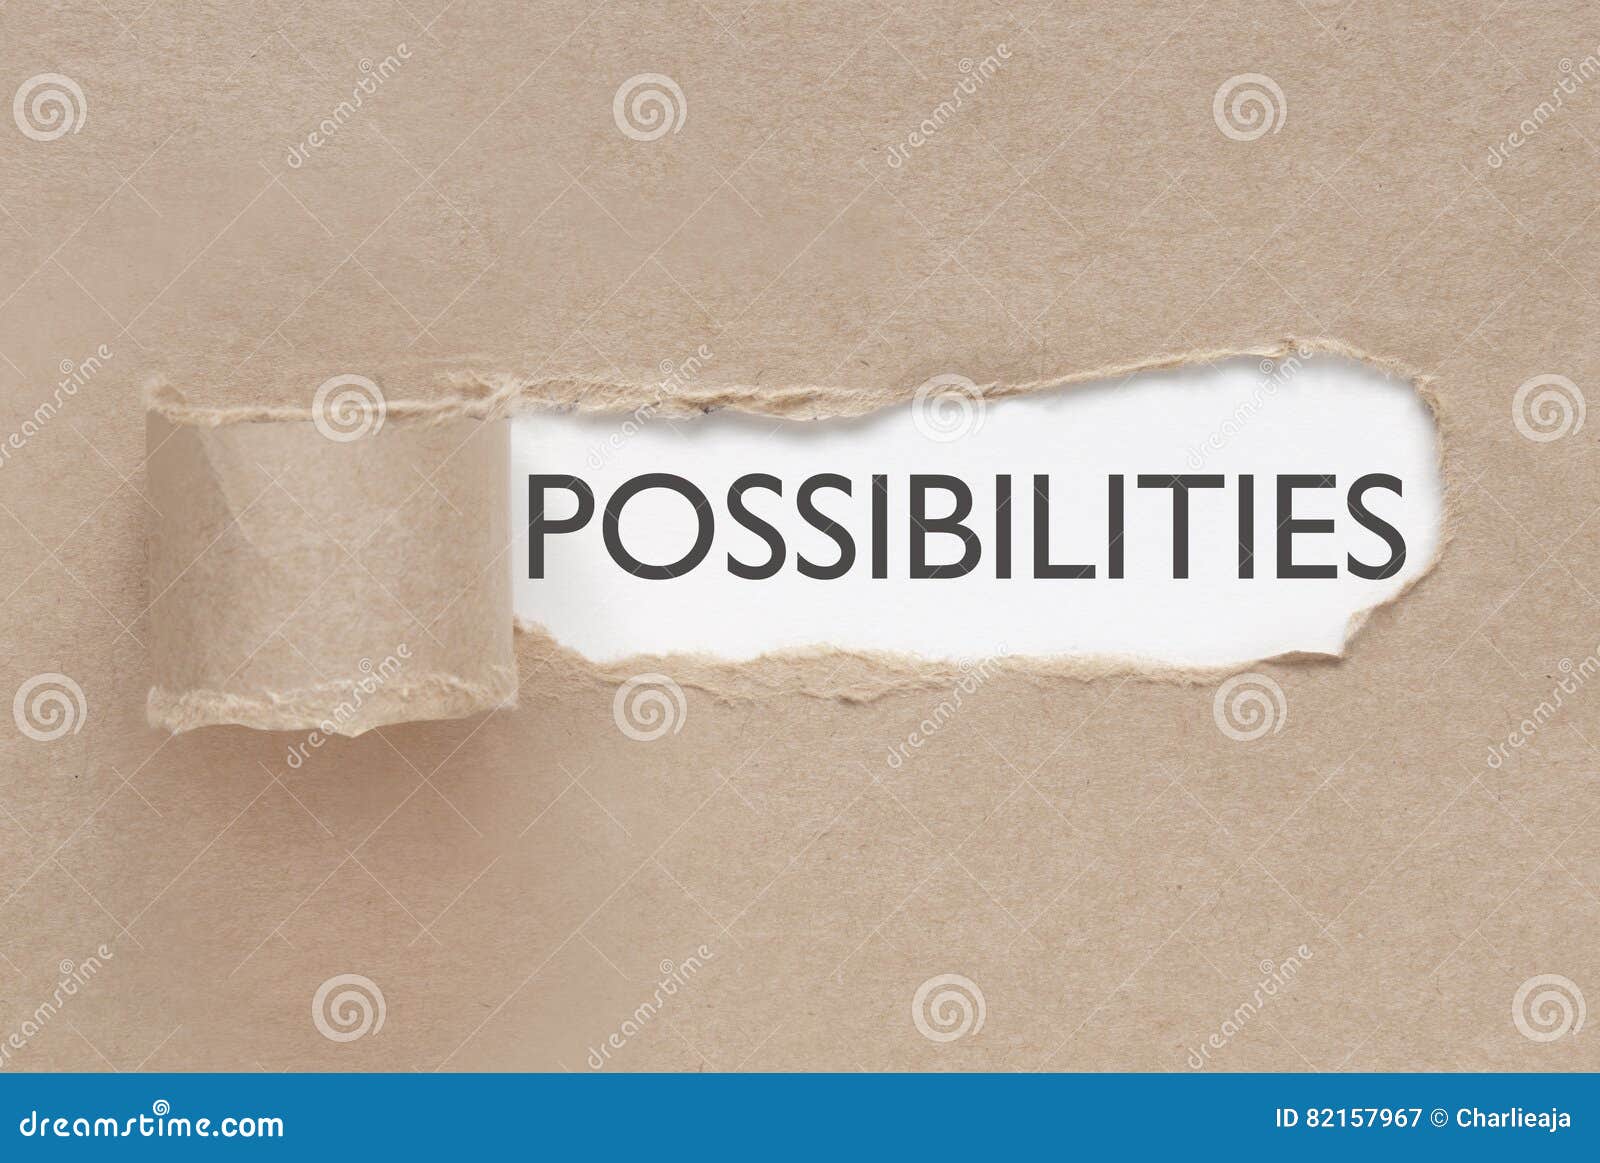 uncovering possibilities